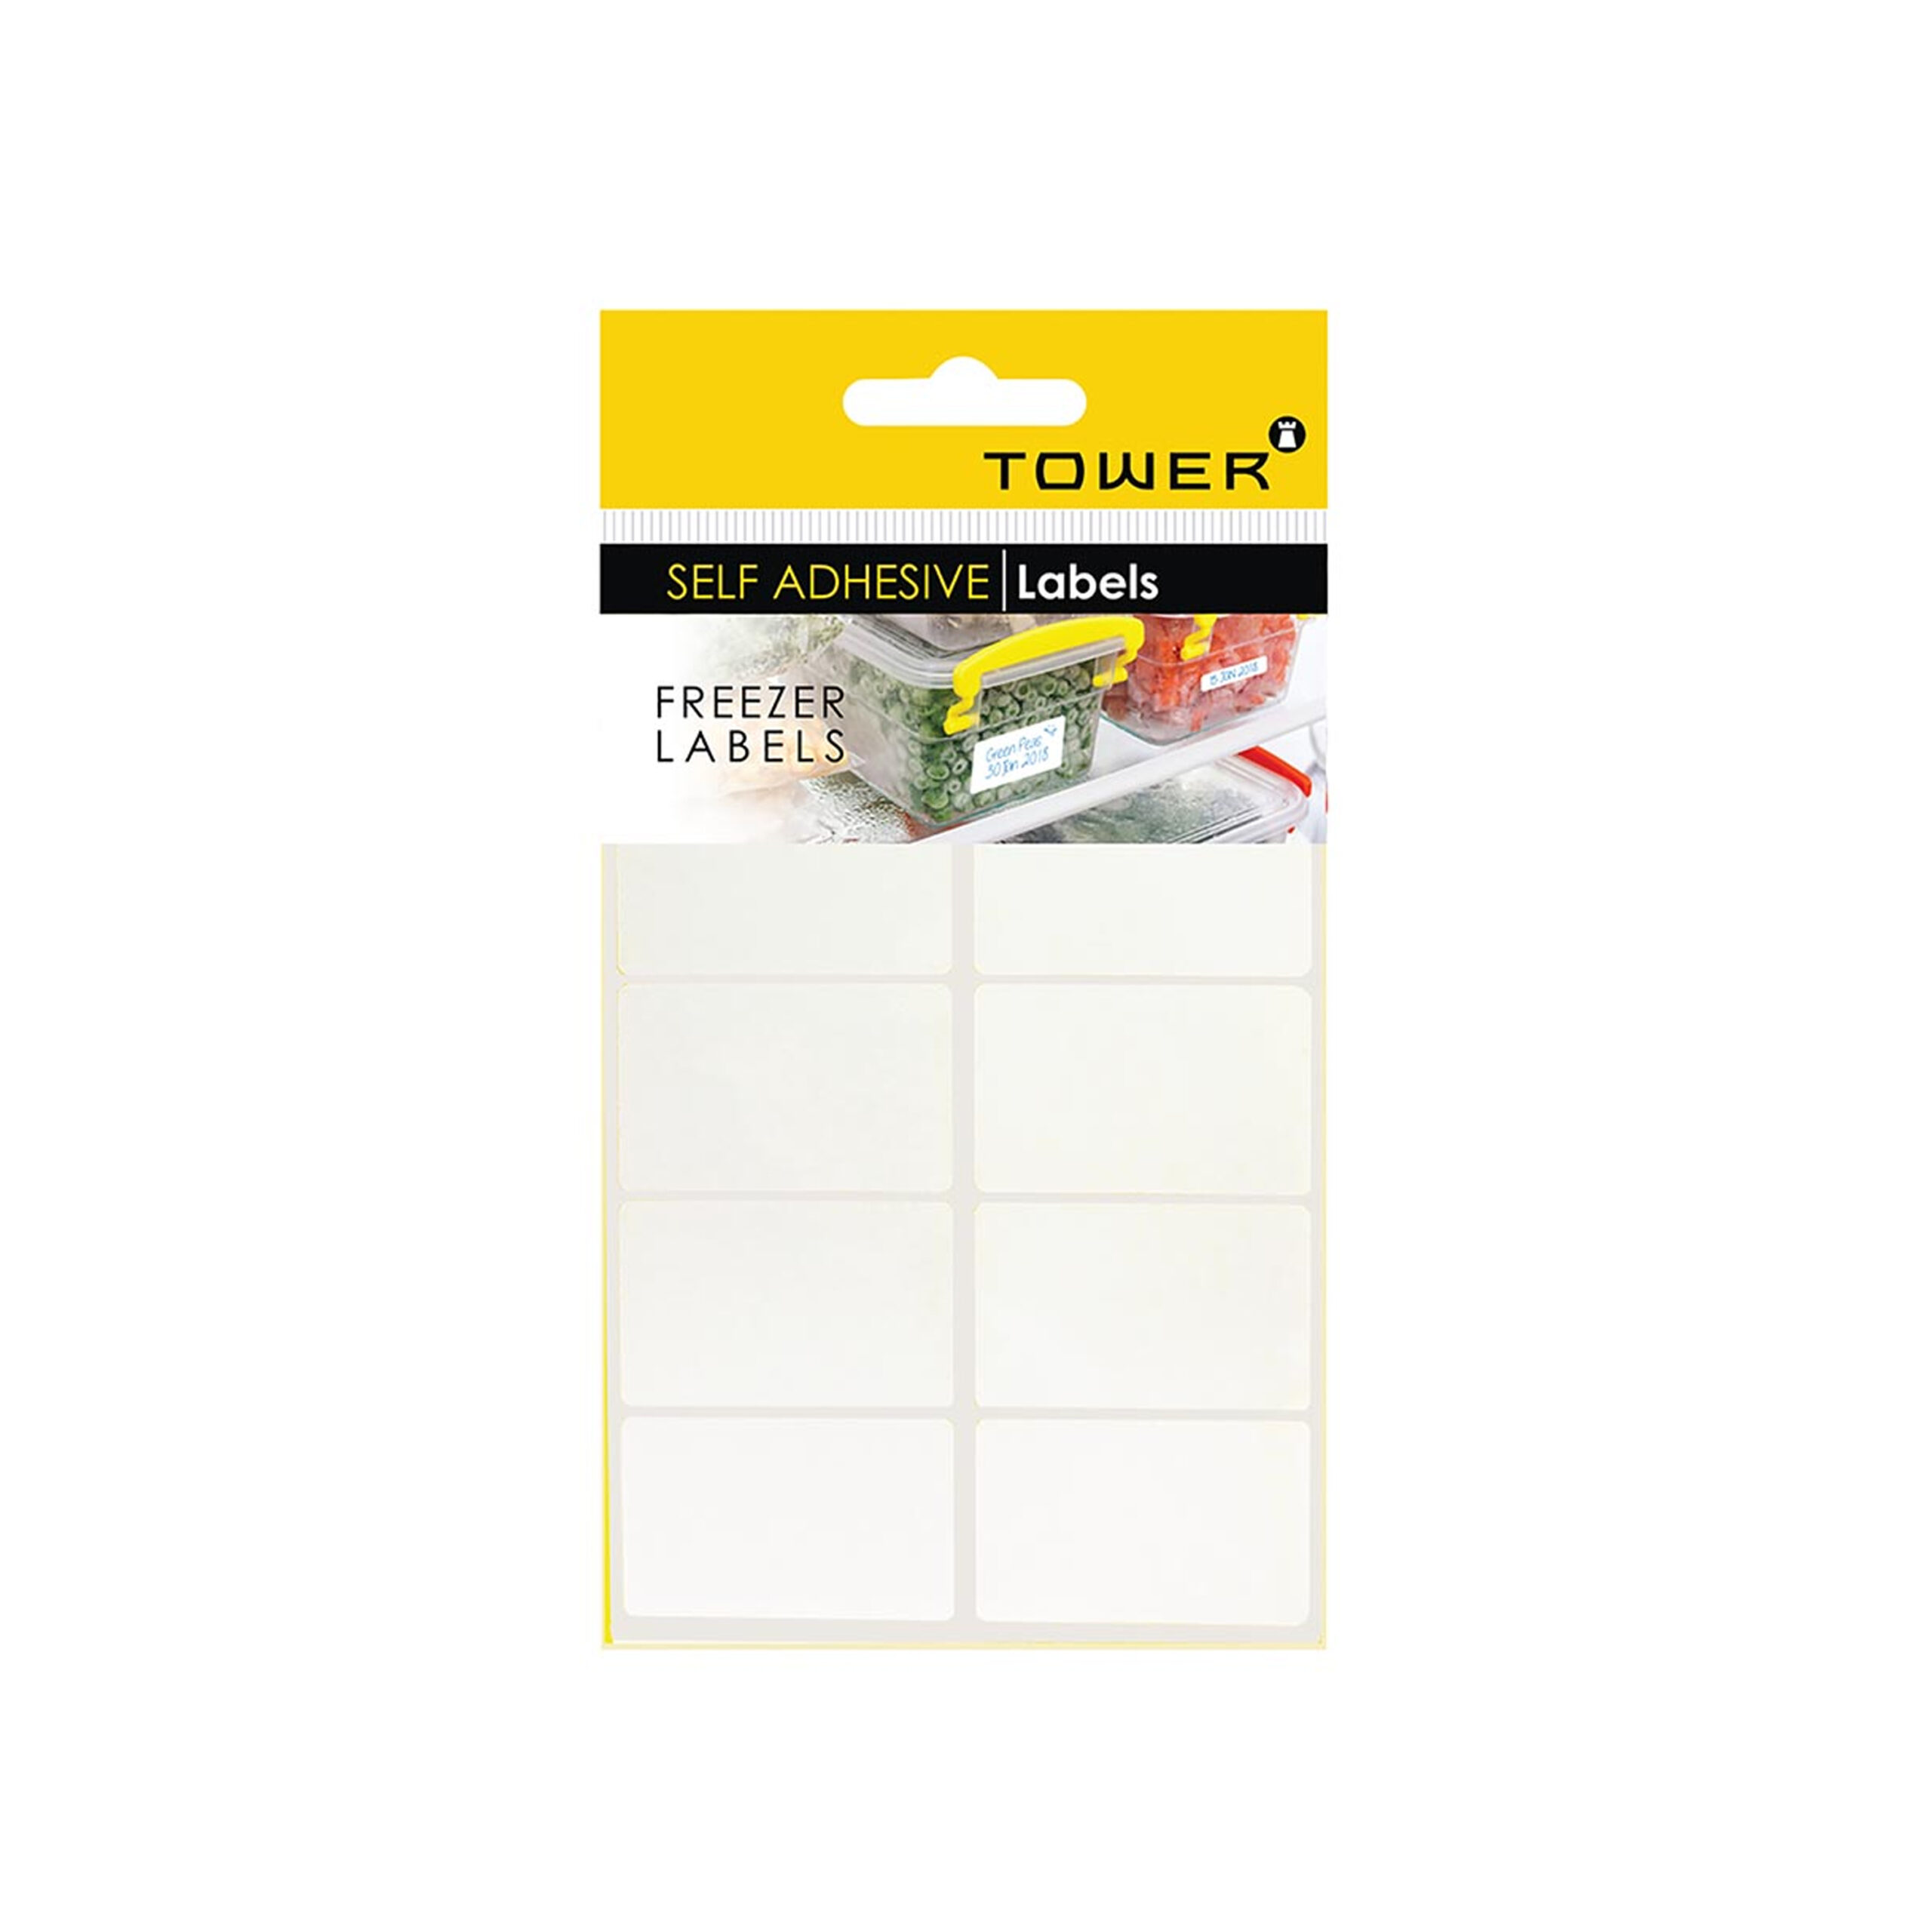 TOWER  SELF
ADHESIVE
FREEZER LABELS
32x50mm  (100
LABELS)